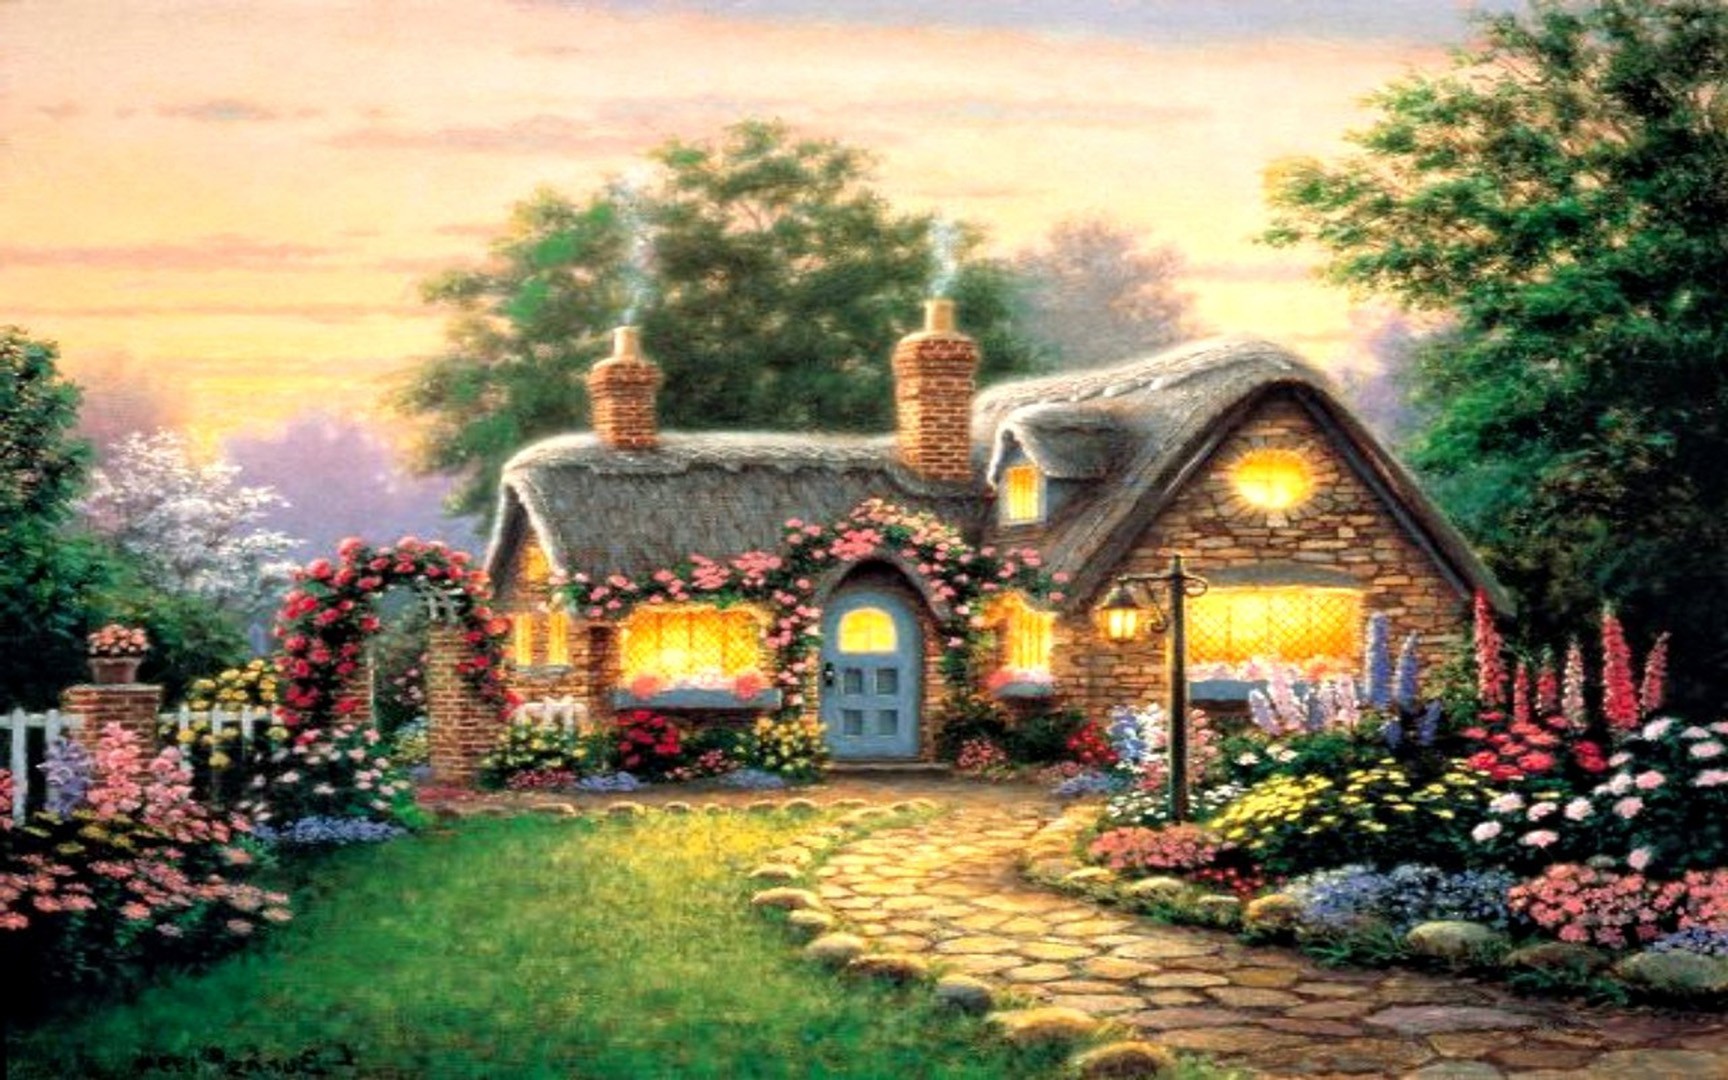 Forest Cottage wallpaper by MARIKA  Download on ZEDGE  3ea8